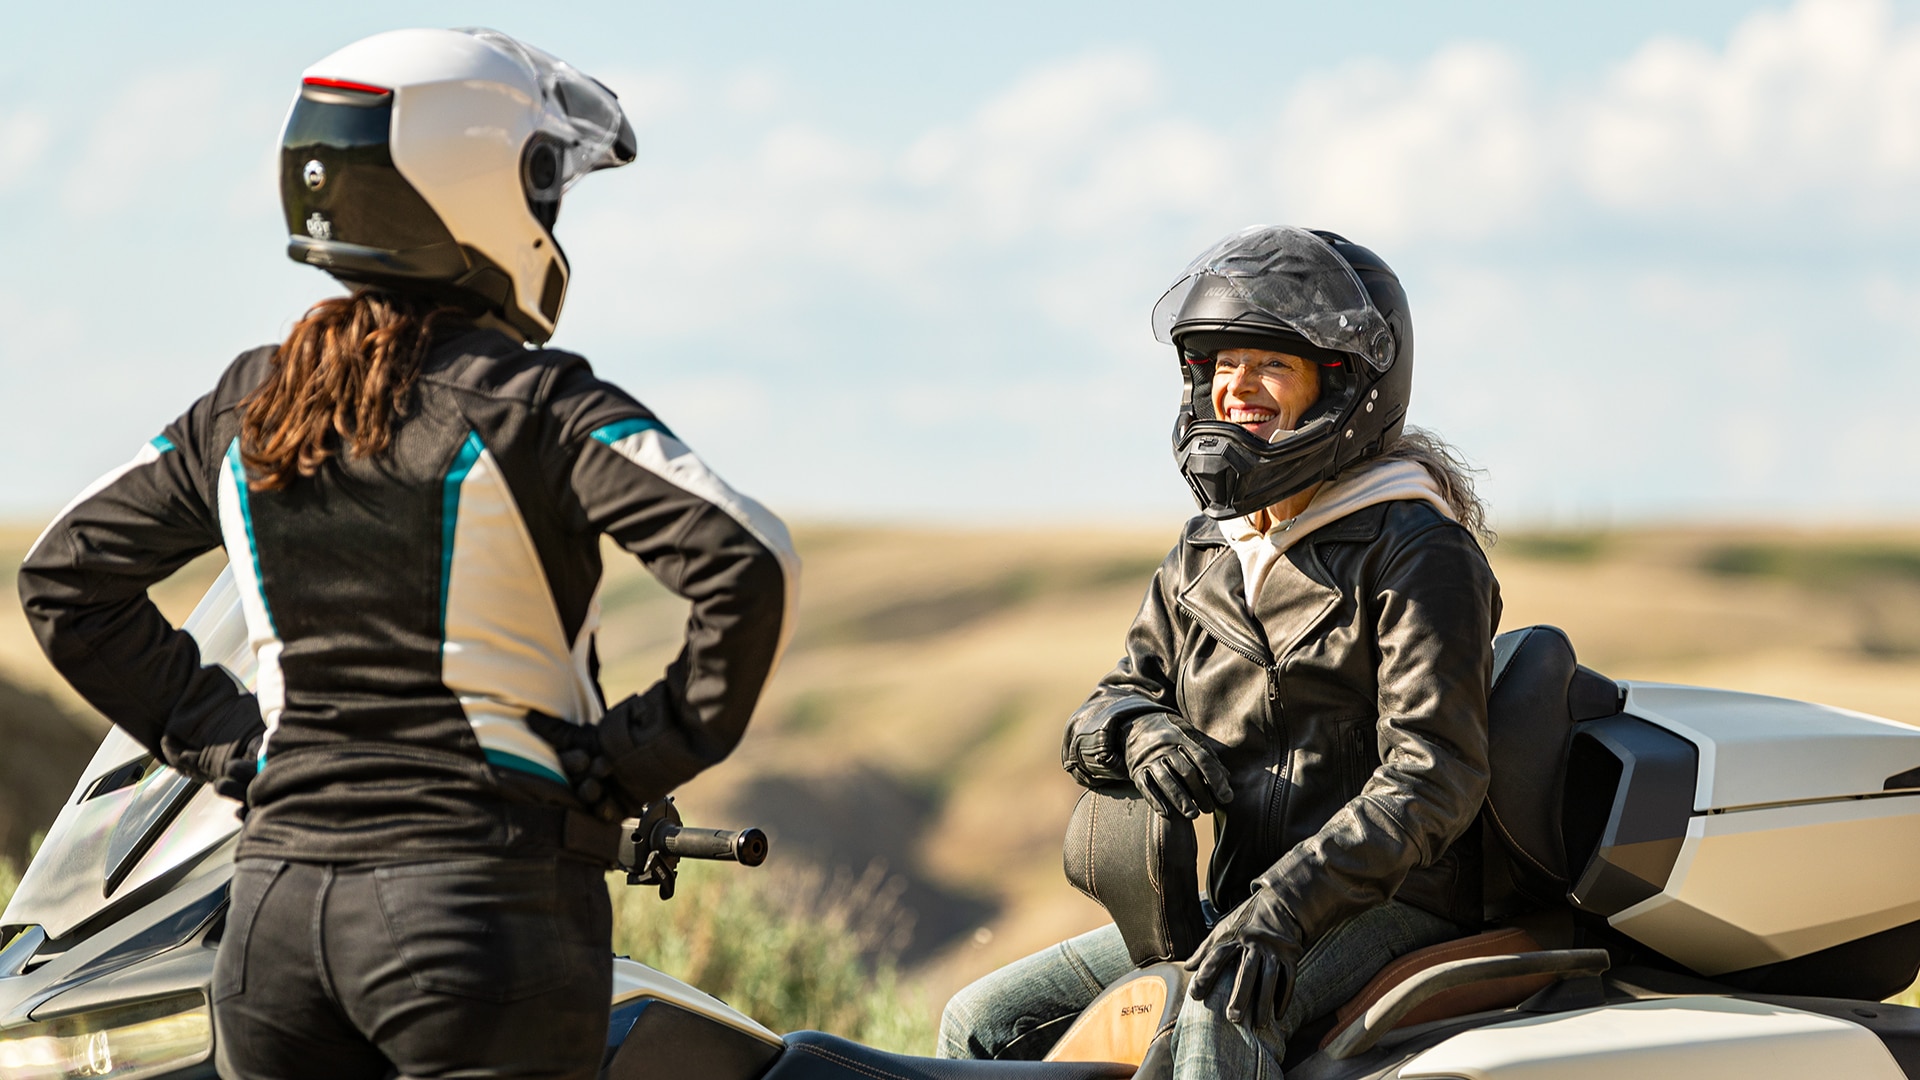 Two women talking and laughing on their 3-Wheel vehicle dressed in Can-Am apparel